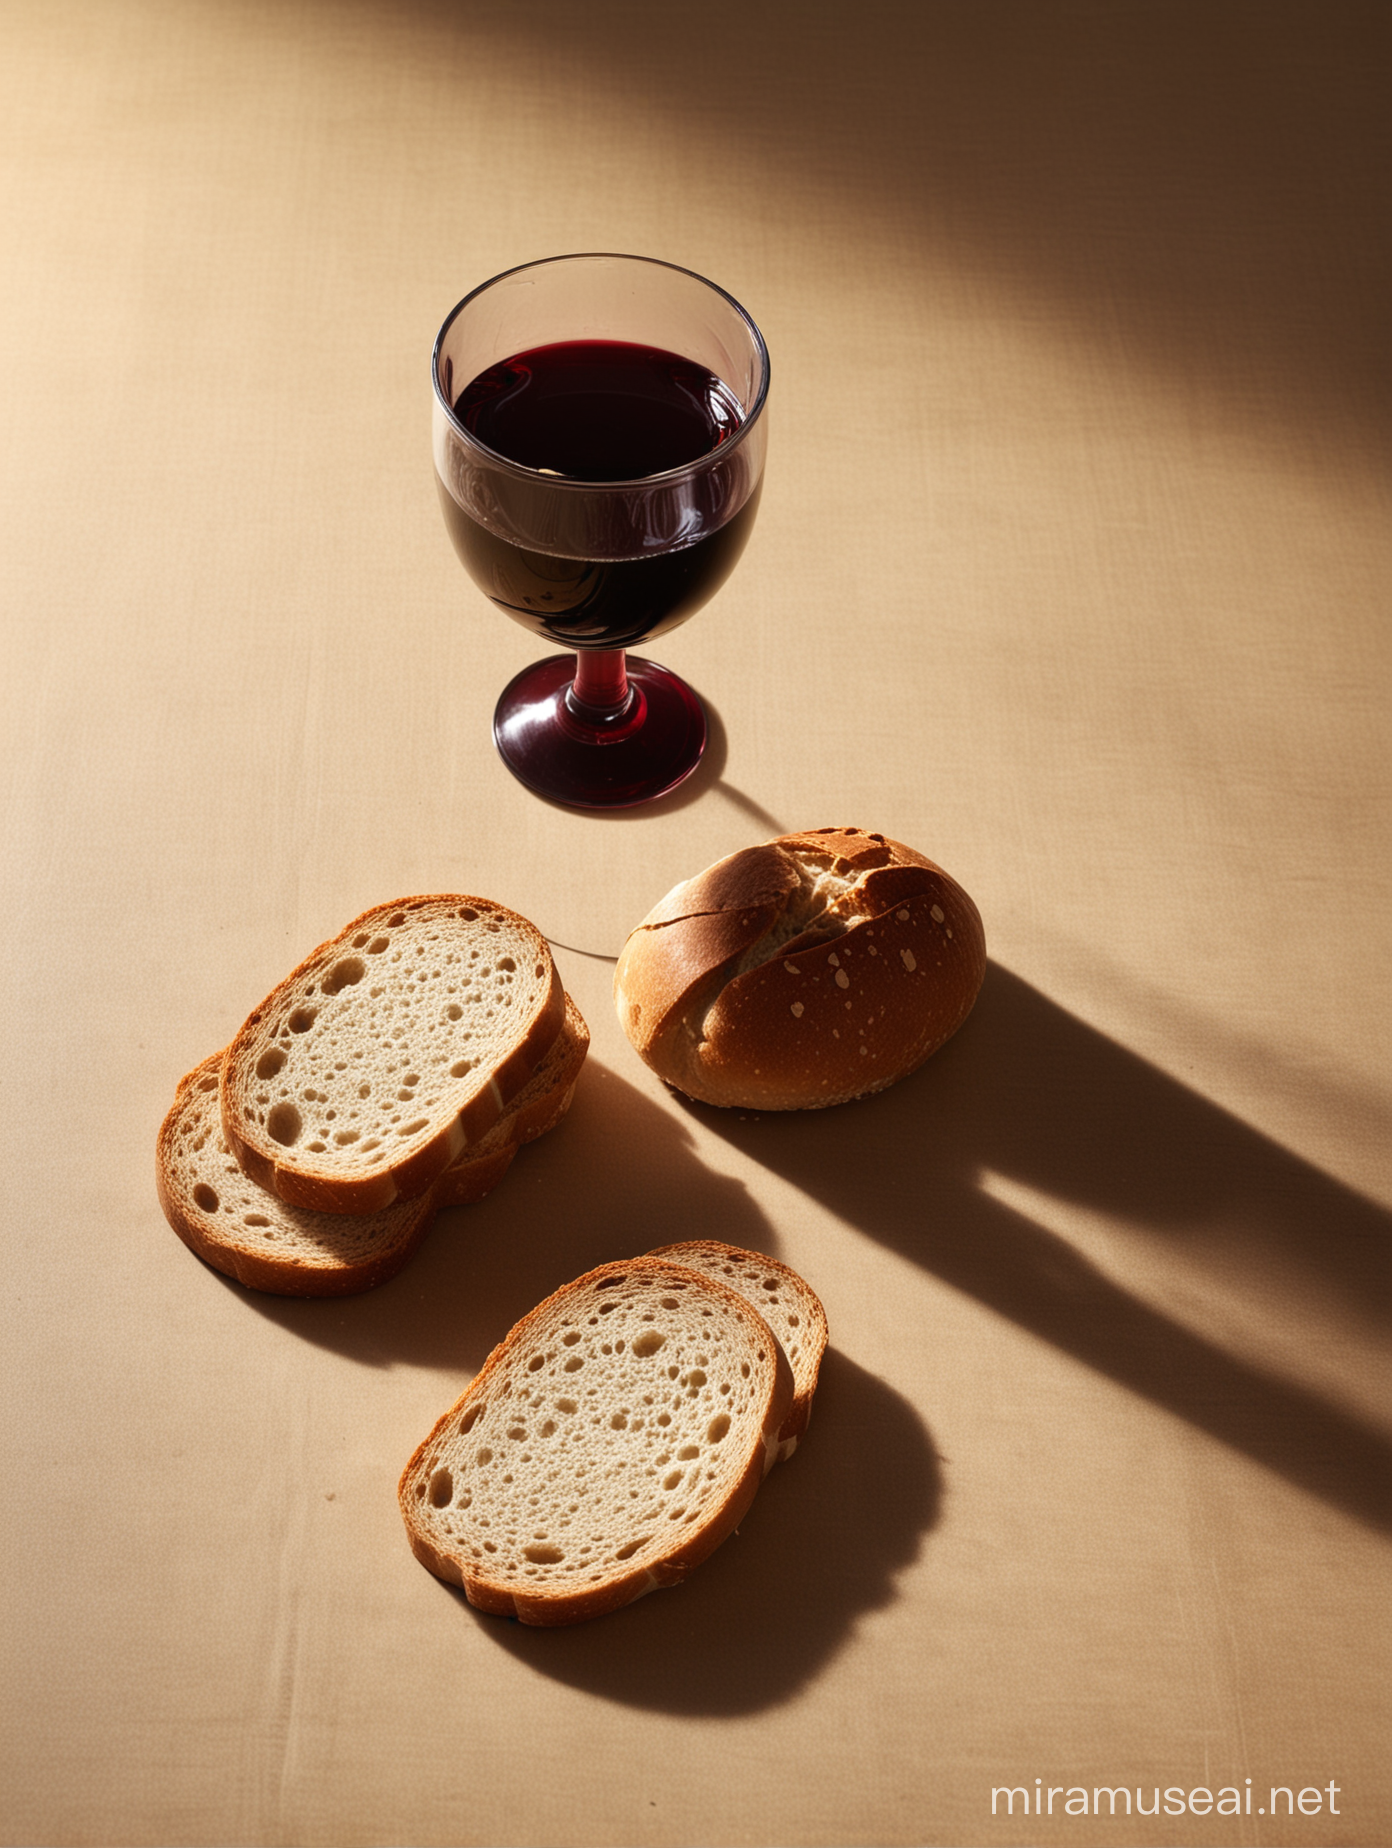 Holy Communion. Sharp shadows, highlights on bread, wine, cup